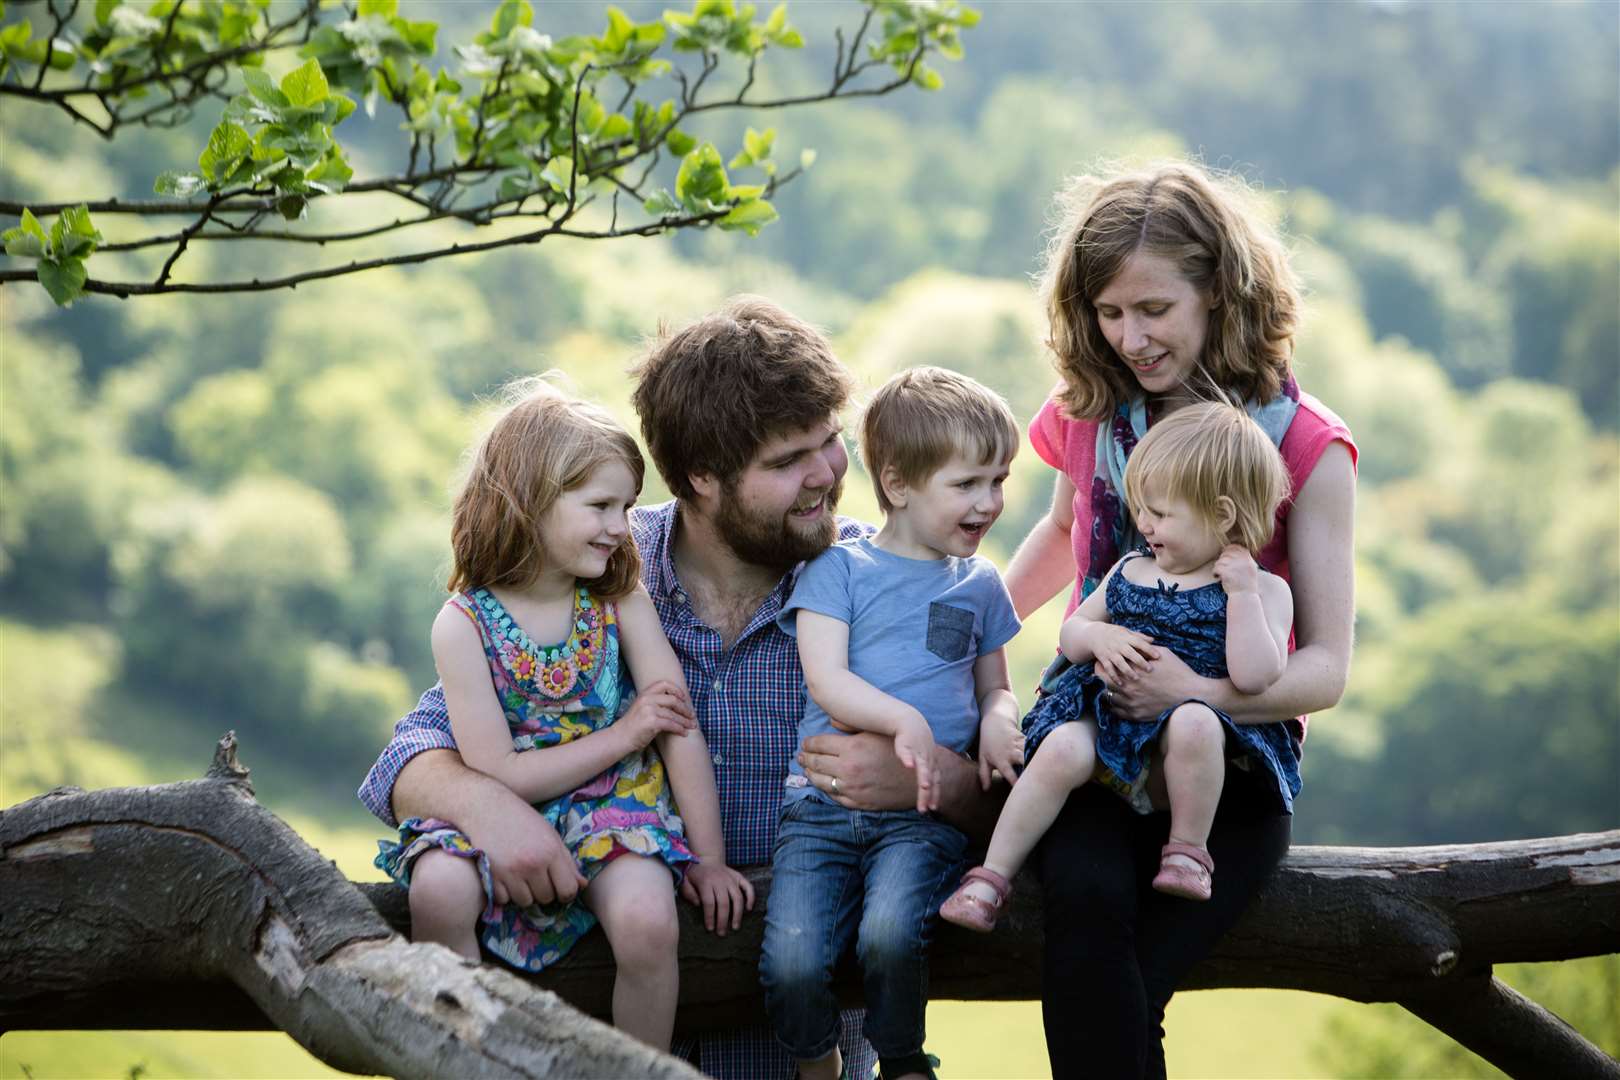 Zoe Powell from Chinnor, Oxfordshire, with her husband Josh and their three children Phoebe, eight, Simeon, six, Amelia, four (Sarah Mak Photography)